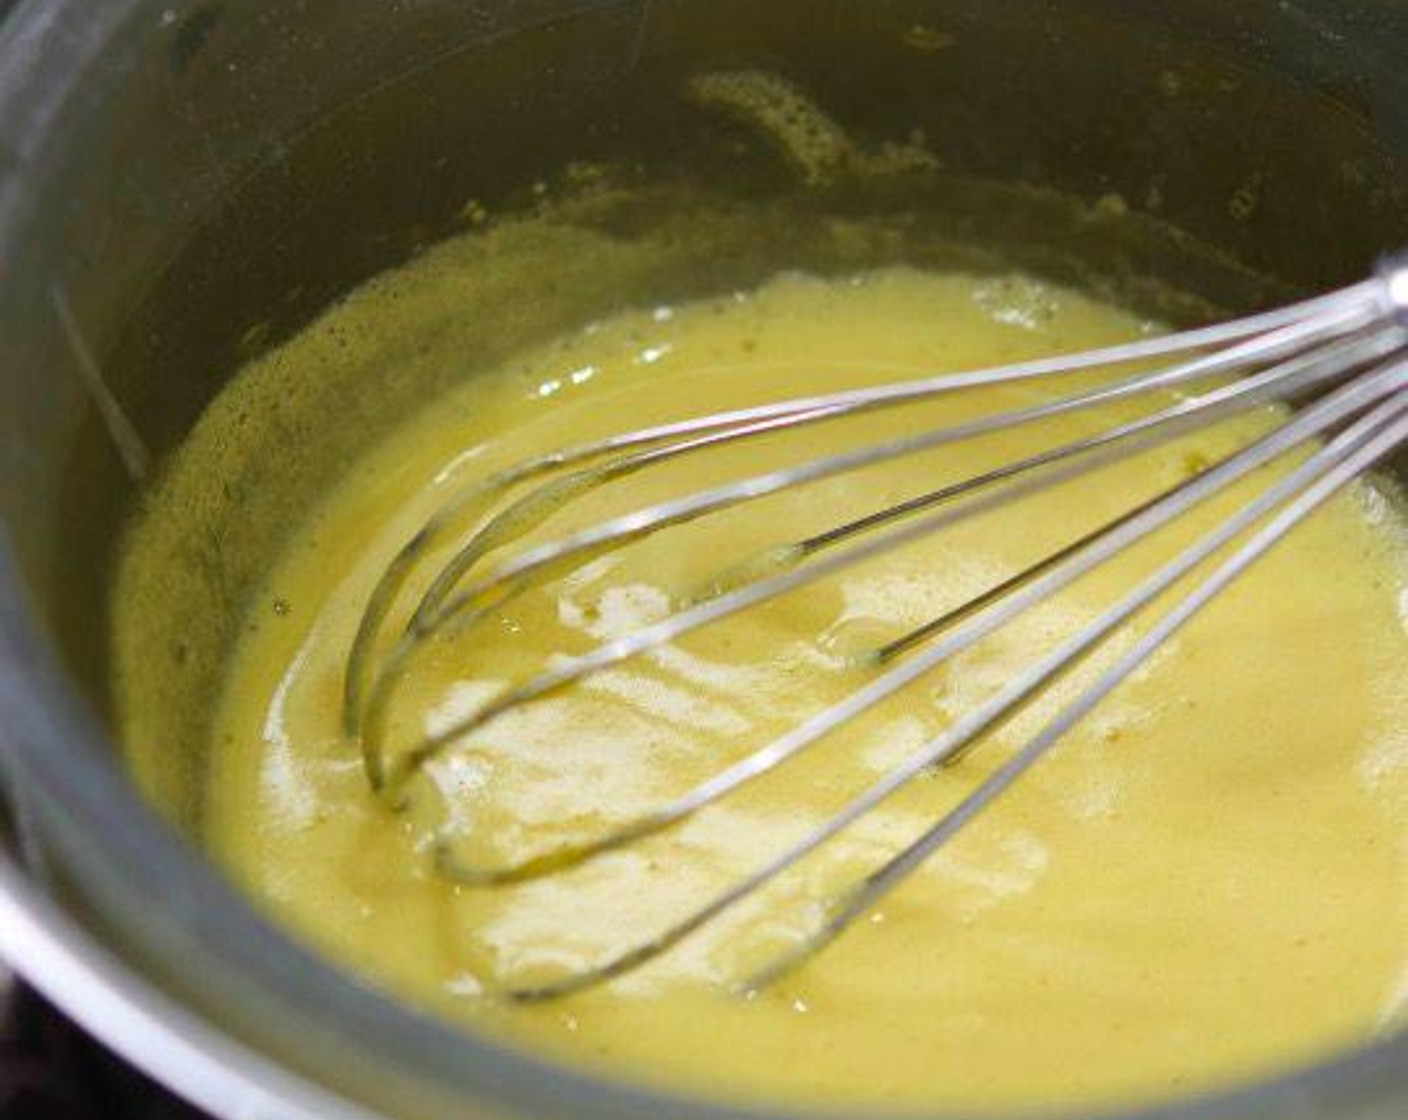 step 3 Add the Distilled White Vinegar (1 tsp) and Salt (1 pinch) to give the Hollandaise a lovely light color and a tangy flavor. Remember to keep the water under your bain marie gently warmed but not boiling or simmering to ensure that you don’t end up with scrambled eggs. If your sauce is getting too hot and clumping, simply remove from the heat and add a touch of Water (1 tsp) to dilute.